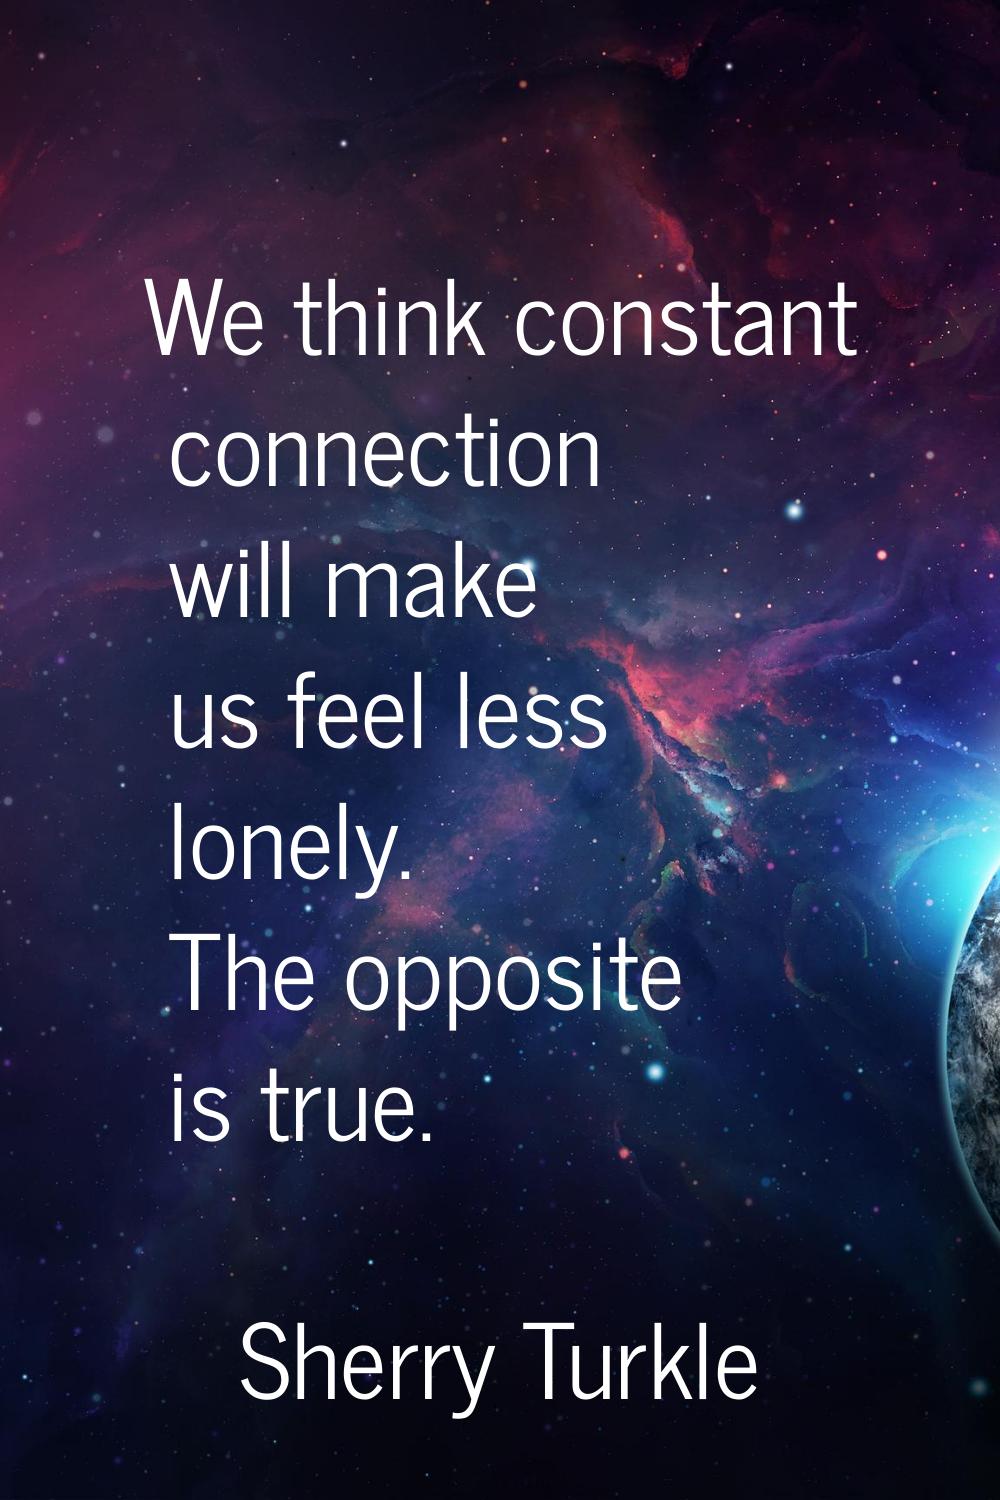 We think constant connection will make us feel less lonely. The opposite is true.